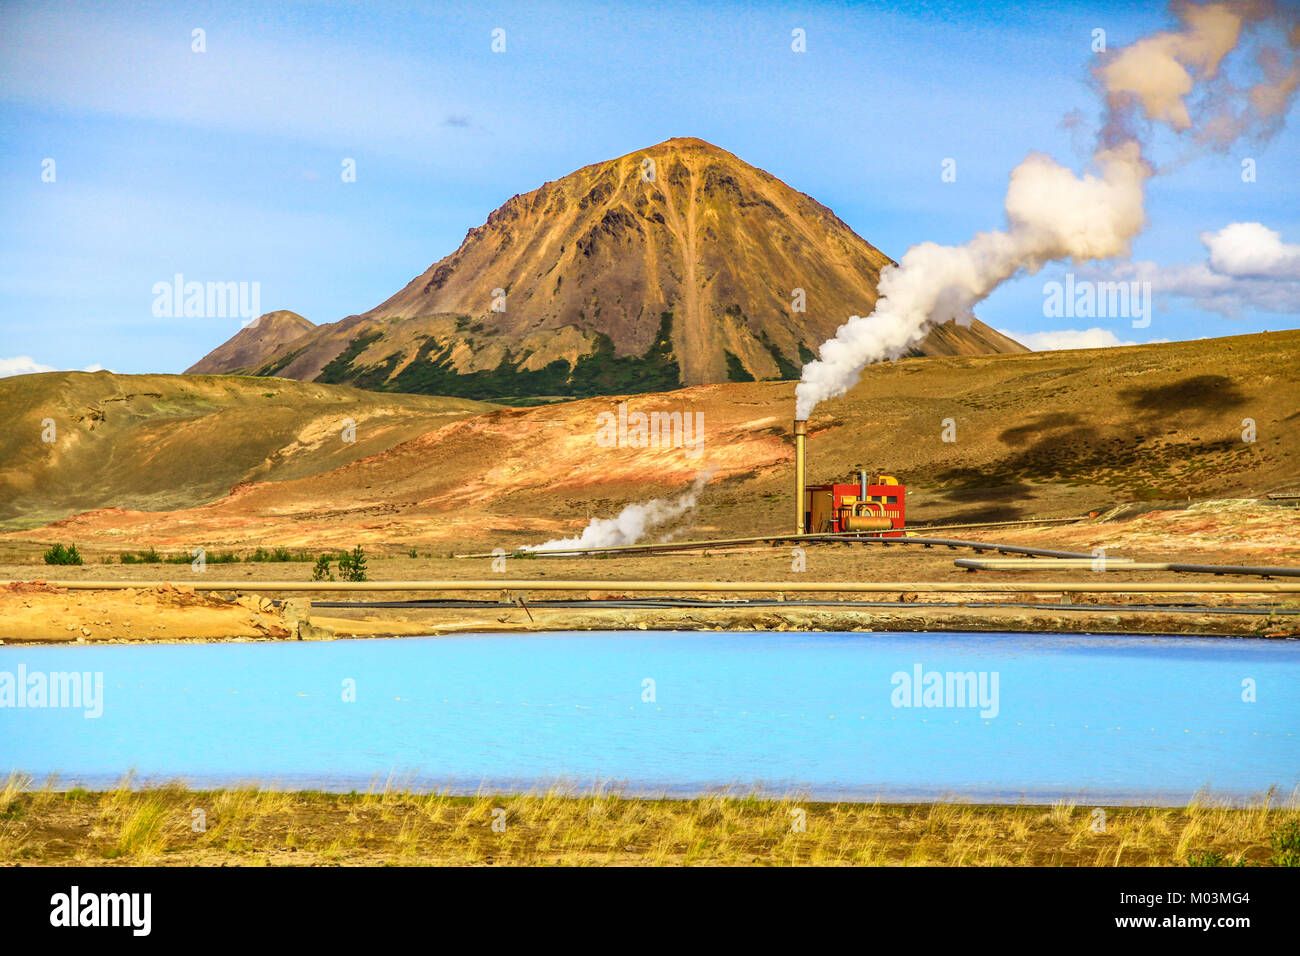 Geothermal landscape at Krafla Bjarnarflag Diatomite power station with Lake Myvatn and Hlidarfjall Mountain in the background, Myvatn area, northern  Stock Photo